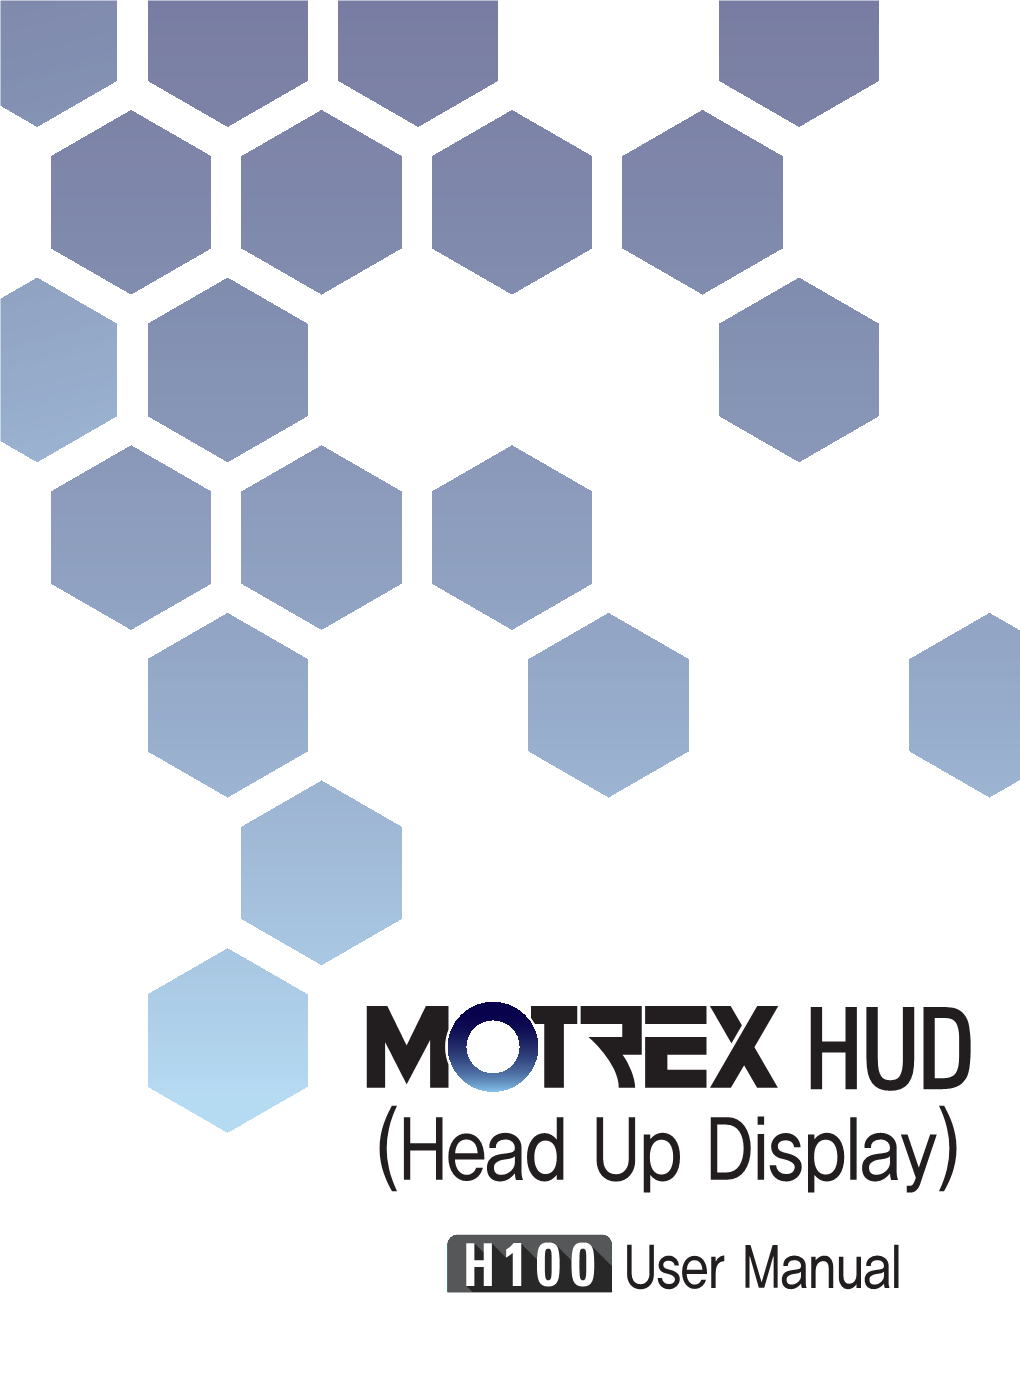 (Head up Display) User Manual Table of Contents